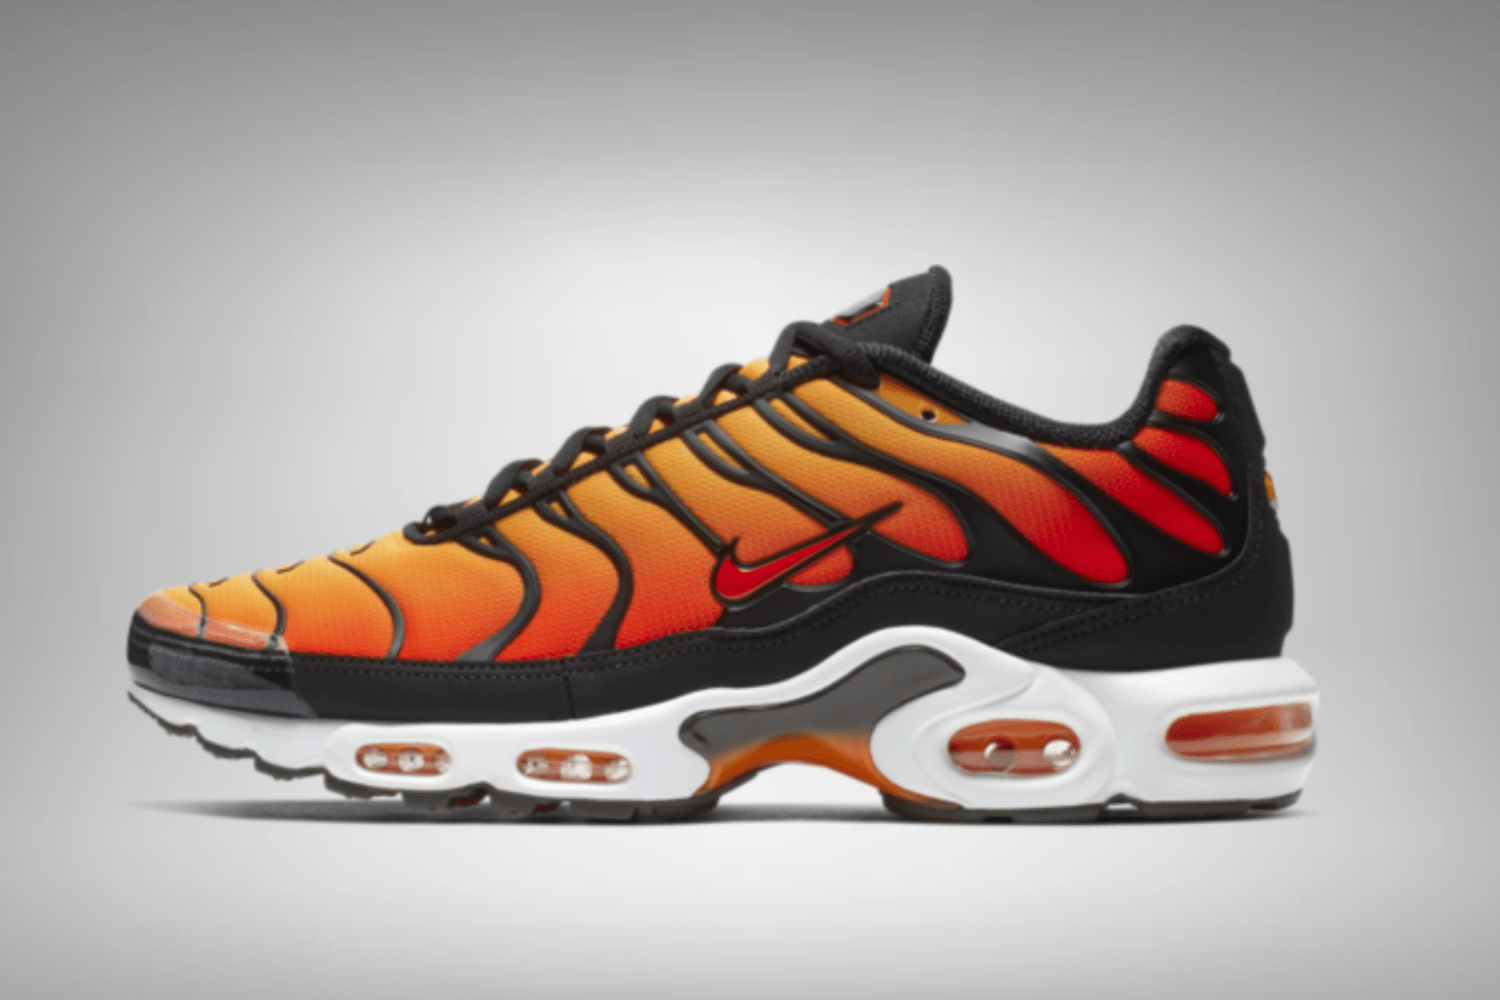 Nike reintroduces the Air Max Plus 'Sunset' in 2024